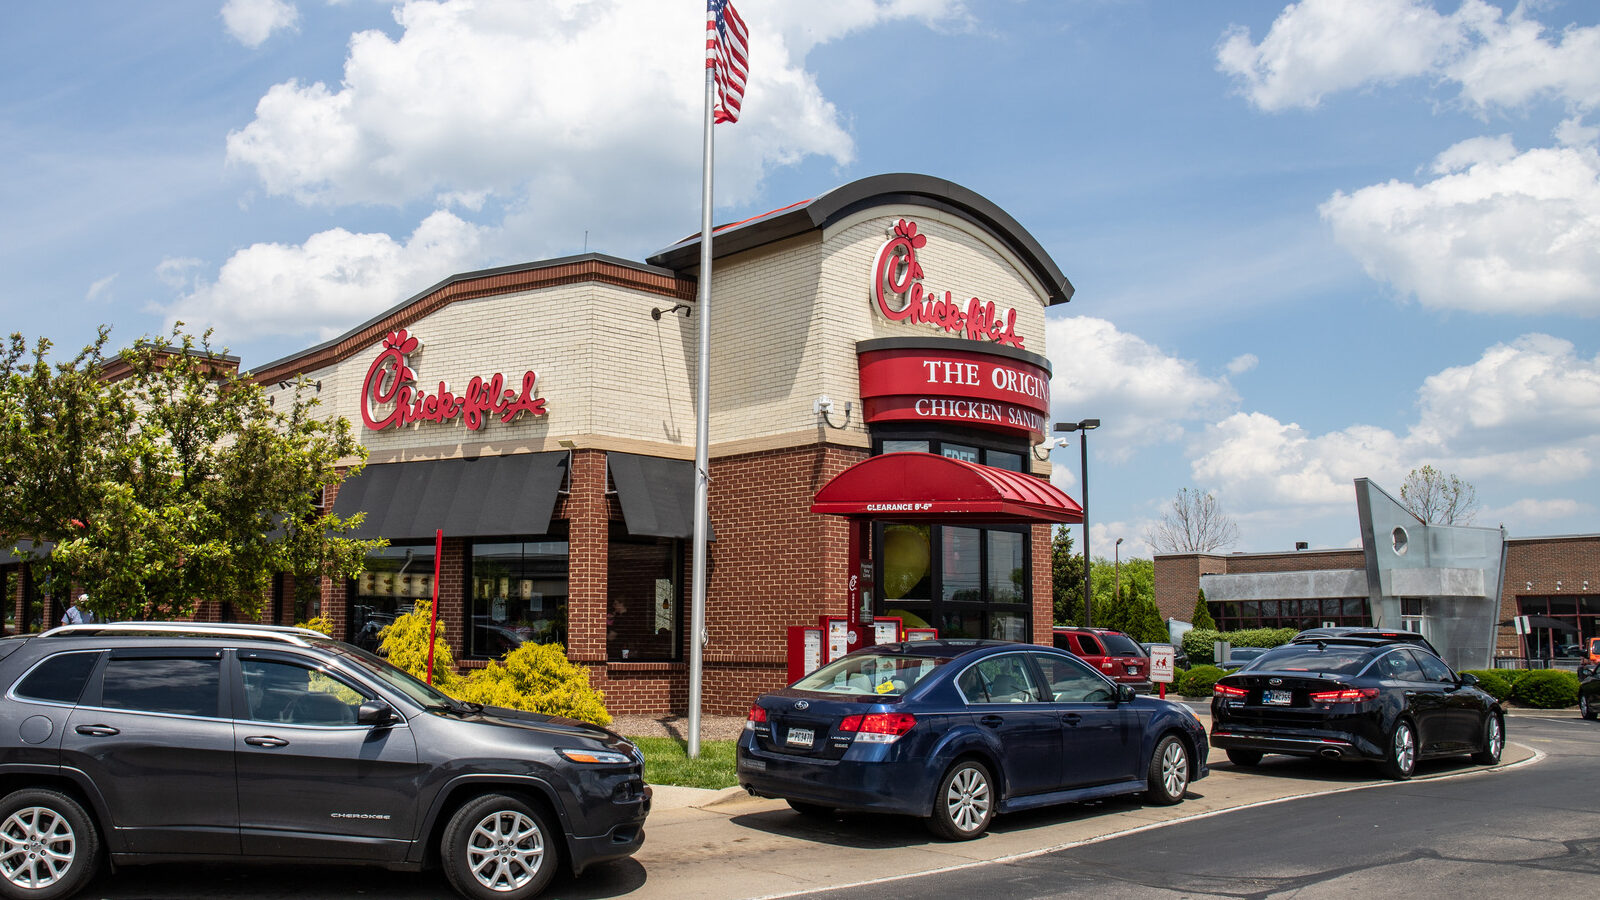 Indianapolis - Circa May 2019: Chick-fil-A chicken restaurant. Despite ongoing controversy, Chick-fil-A is wildly popular II